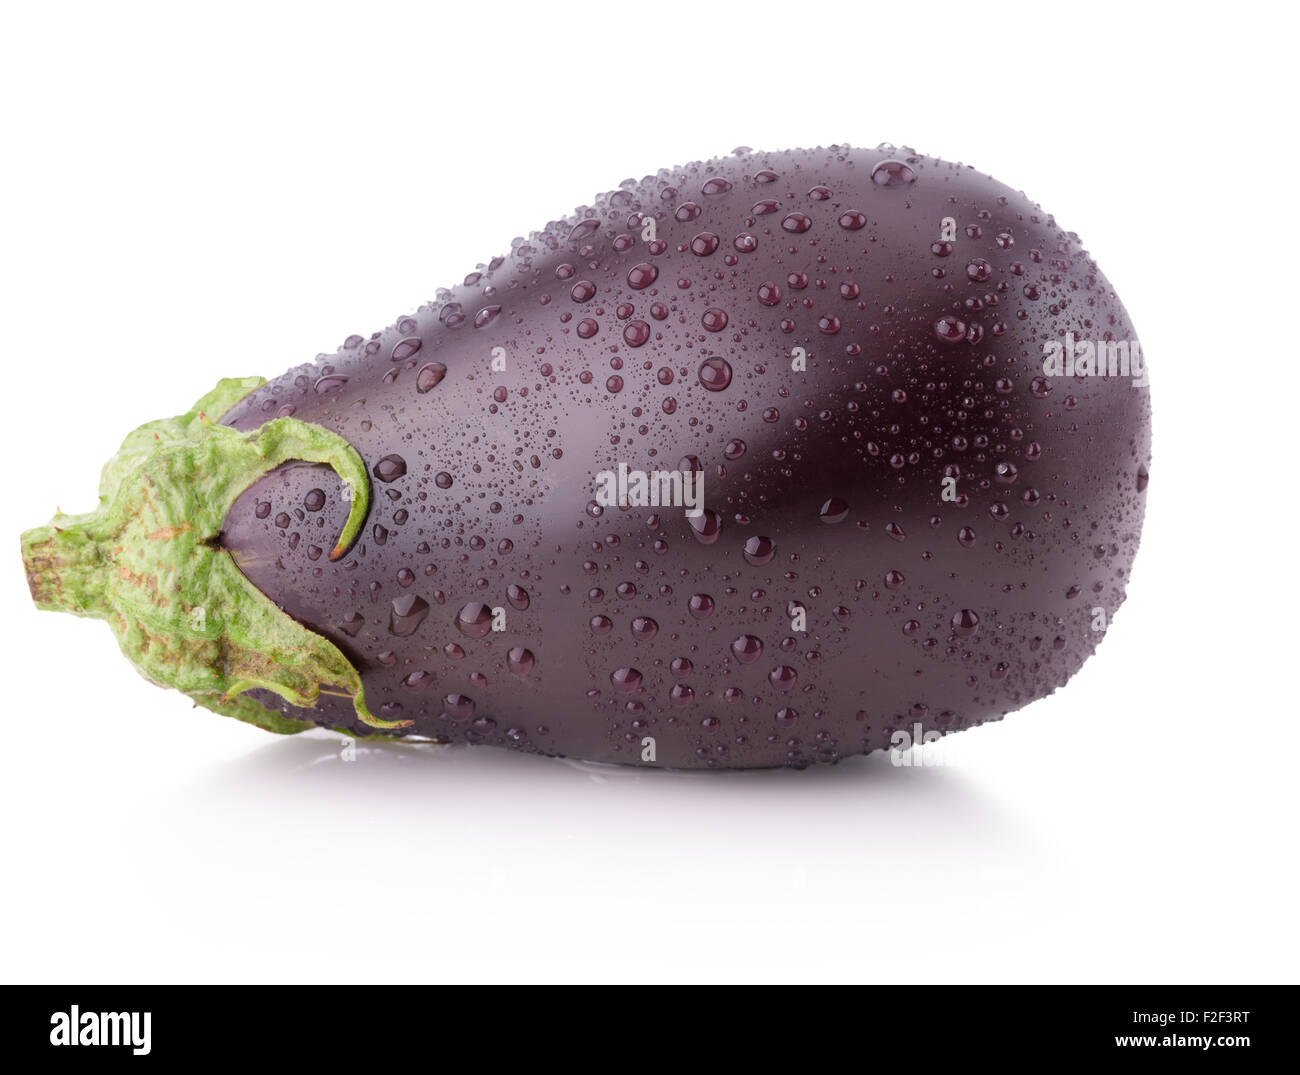 eggplant with water drops isolated on the white background. Stock Photo